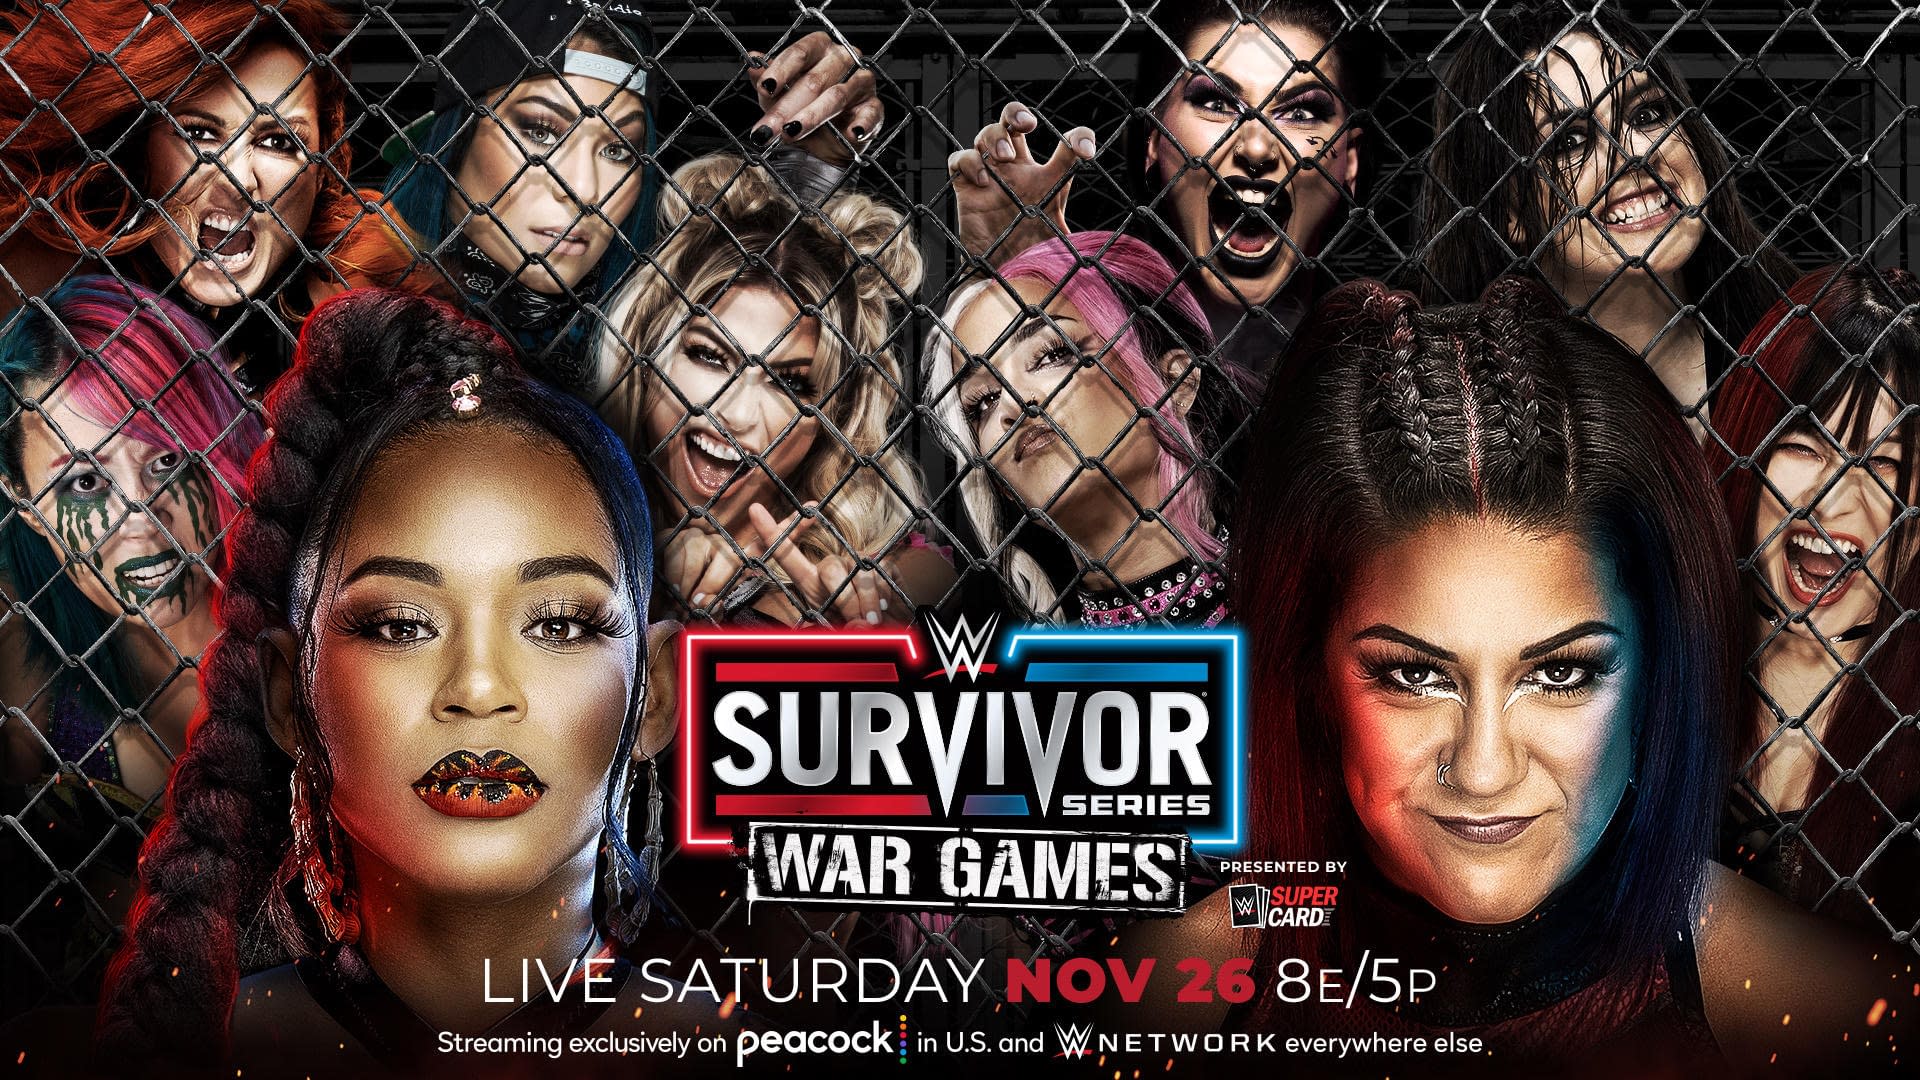 WWE Survivor Series War Games Full Card, How to Watch, Live Results